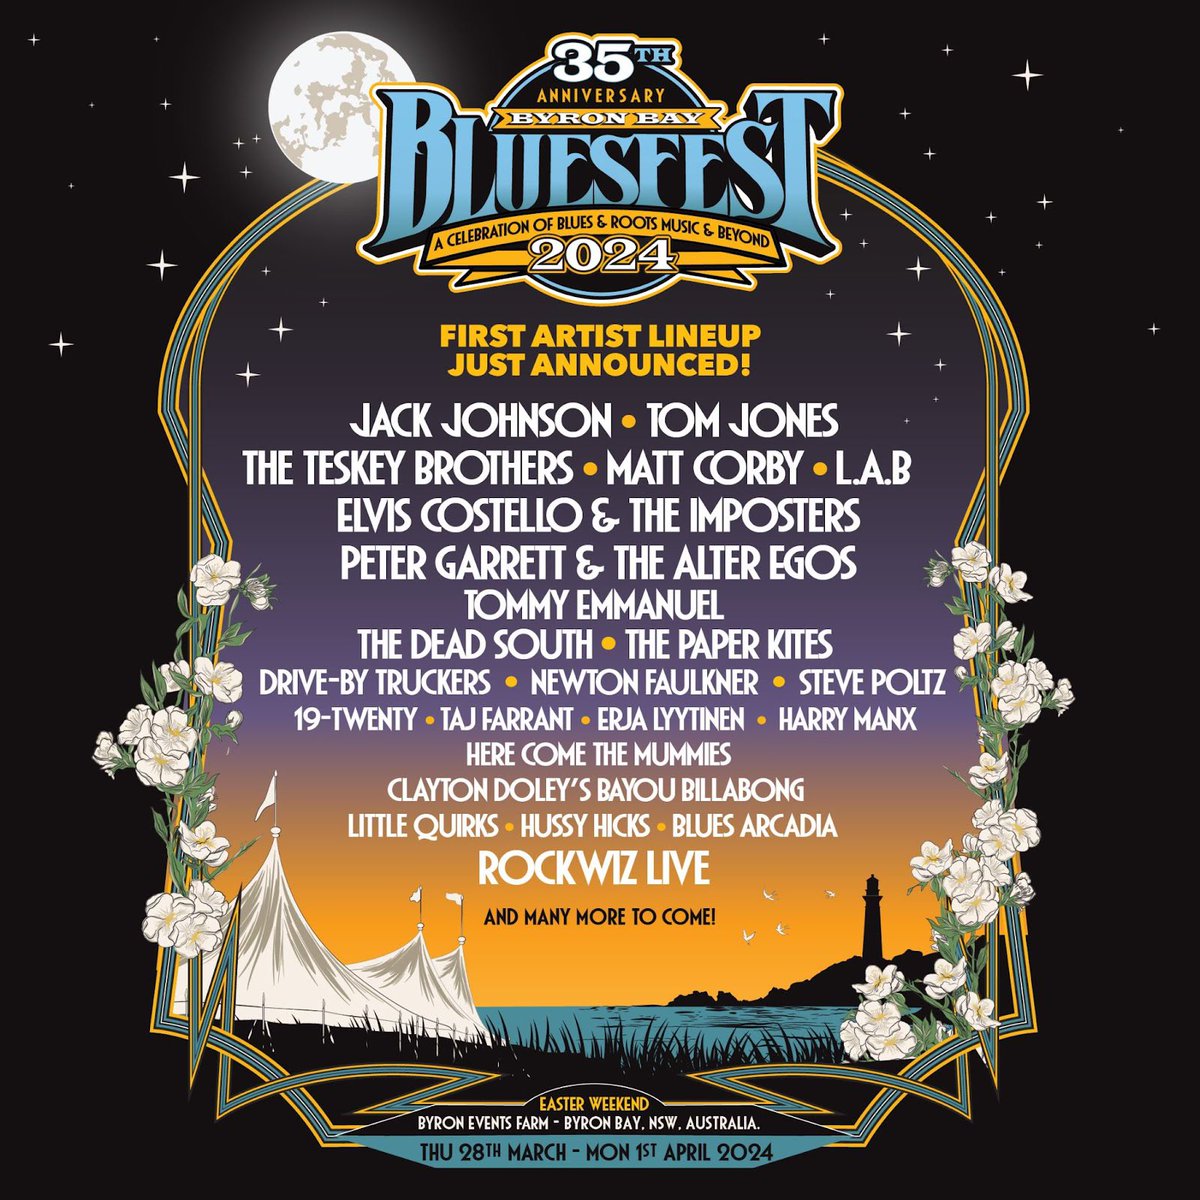 2024 marks the 35th Anniversary of @BluesfestByron. We are happy to announce Jack & the band will be headlining the festival as their one and only Australia show next year. The festival is held Easter weekend March 28- April 1, 2024. Tix are on sale now. bluesfest.com.au/tickets/